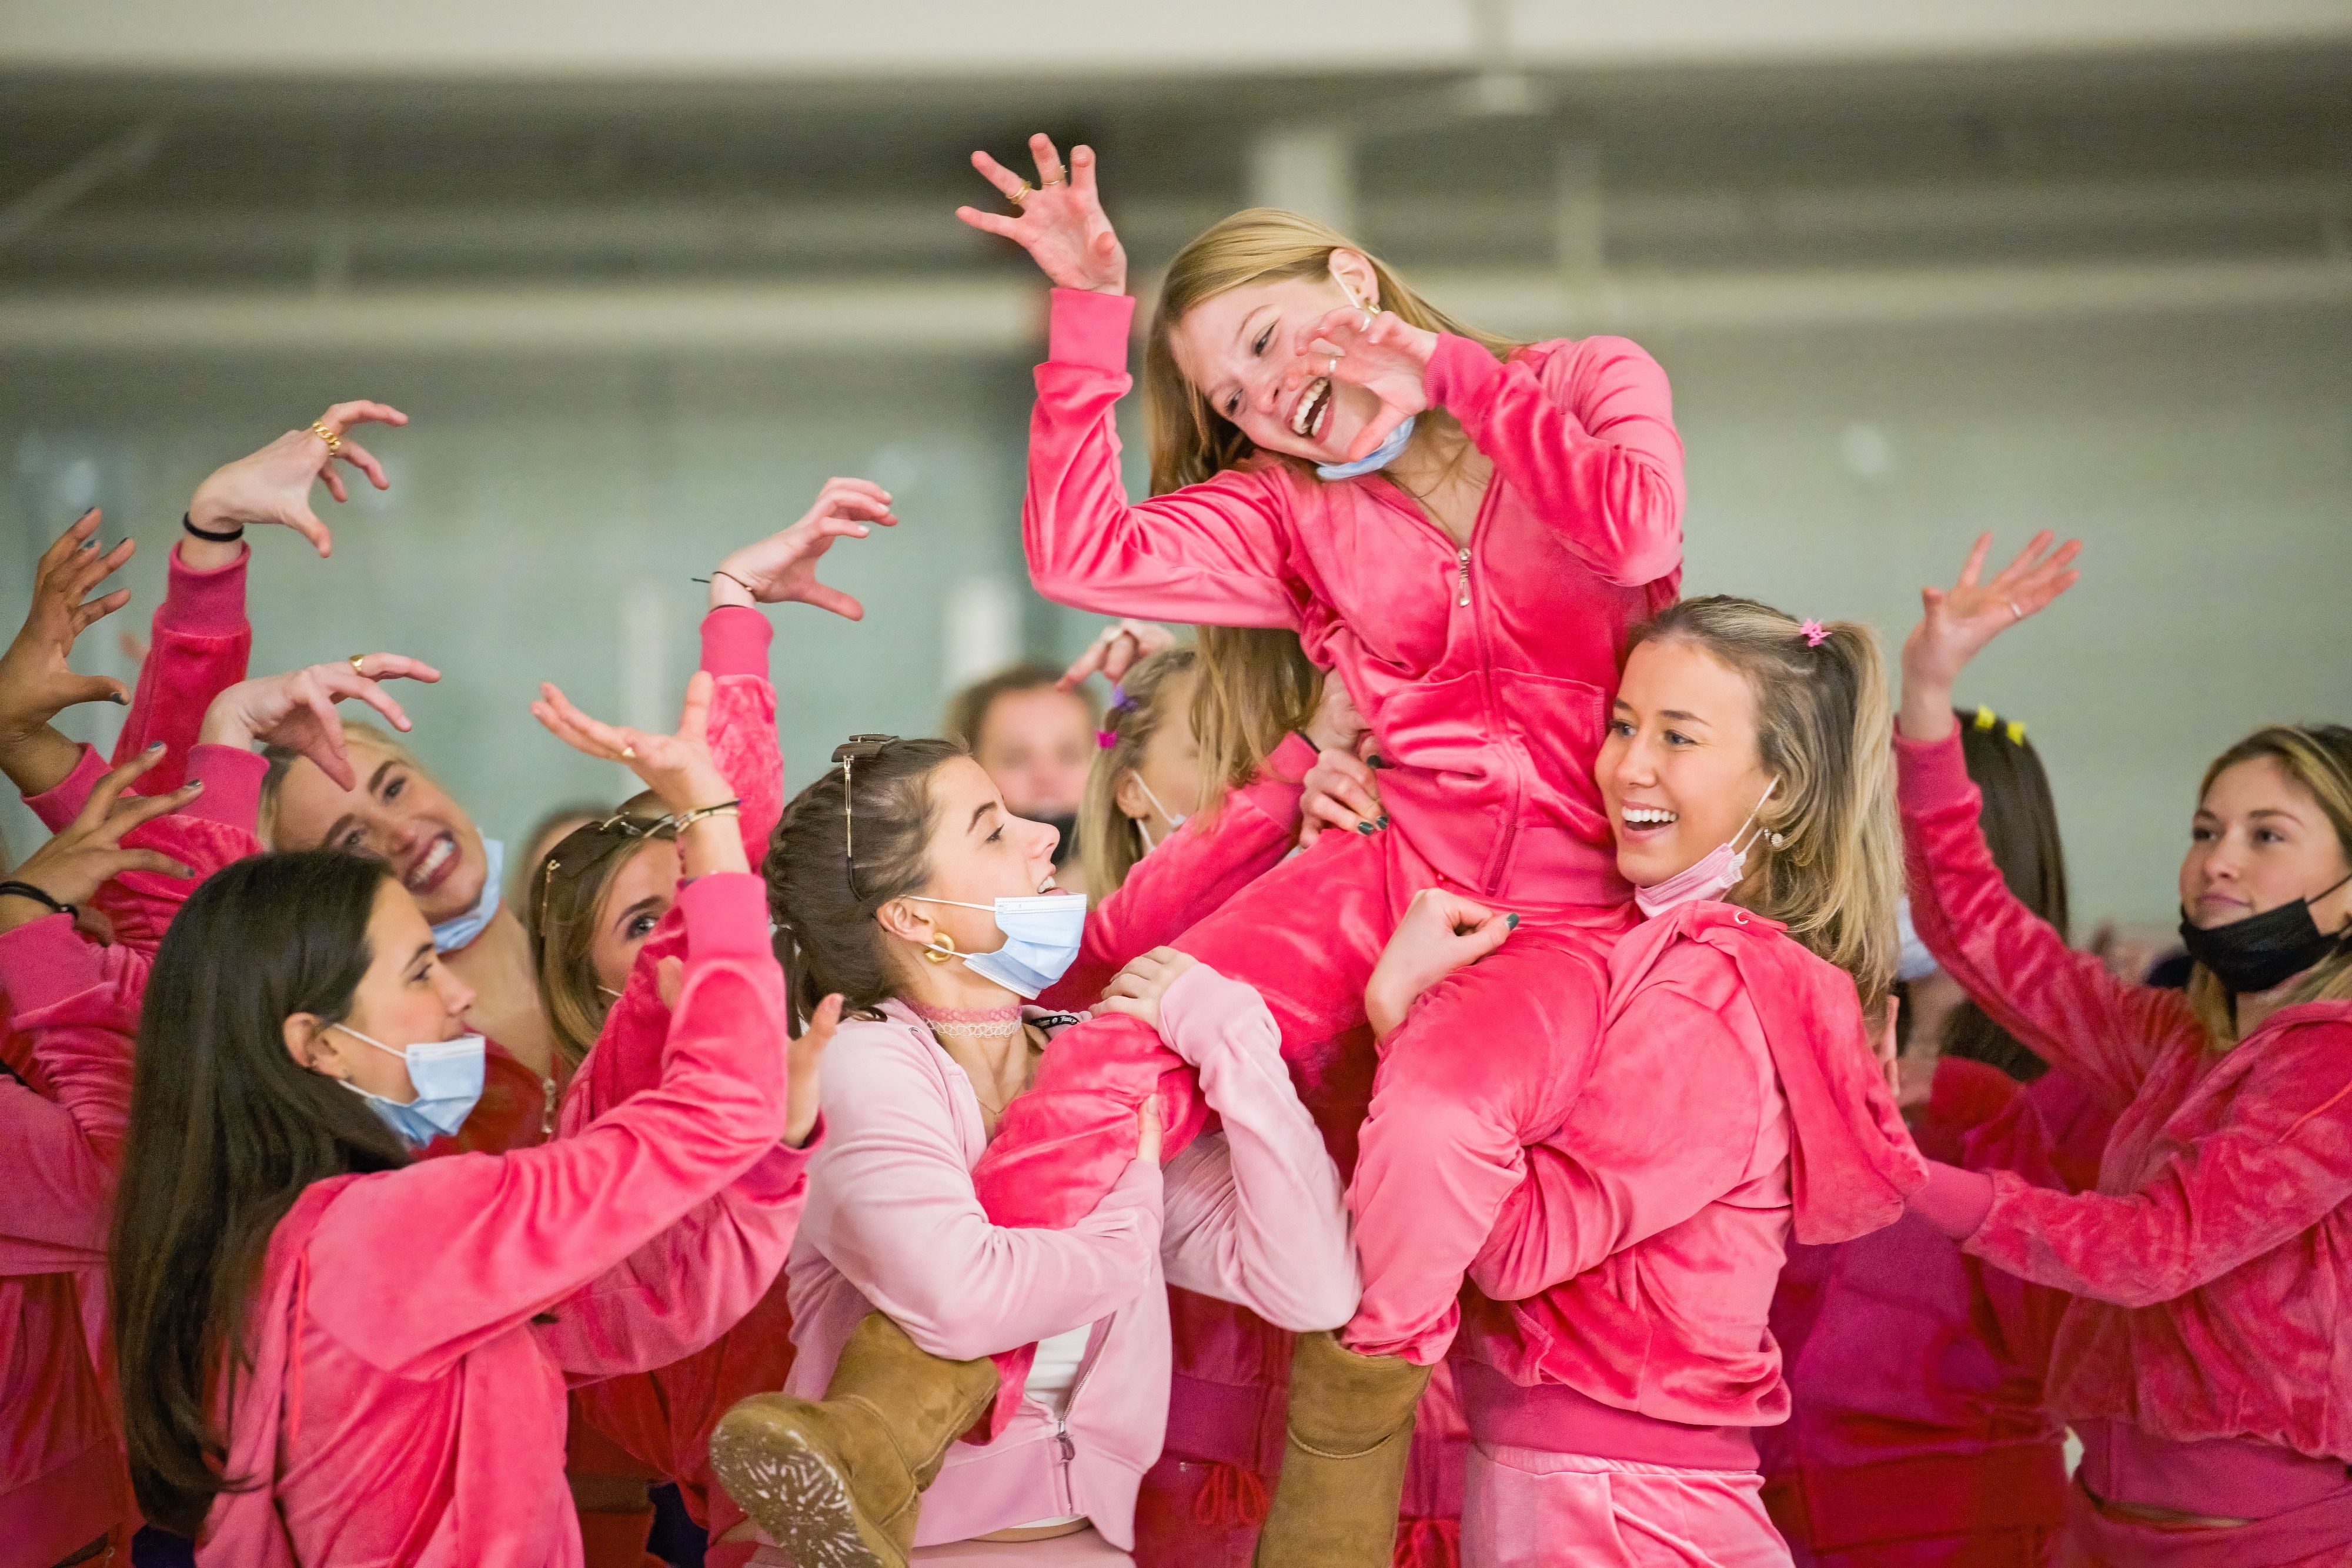 High school girls wearing pink performing with hands up 